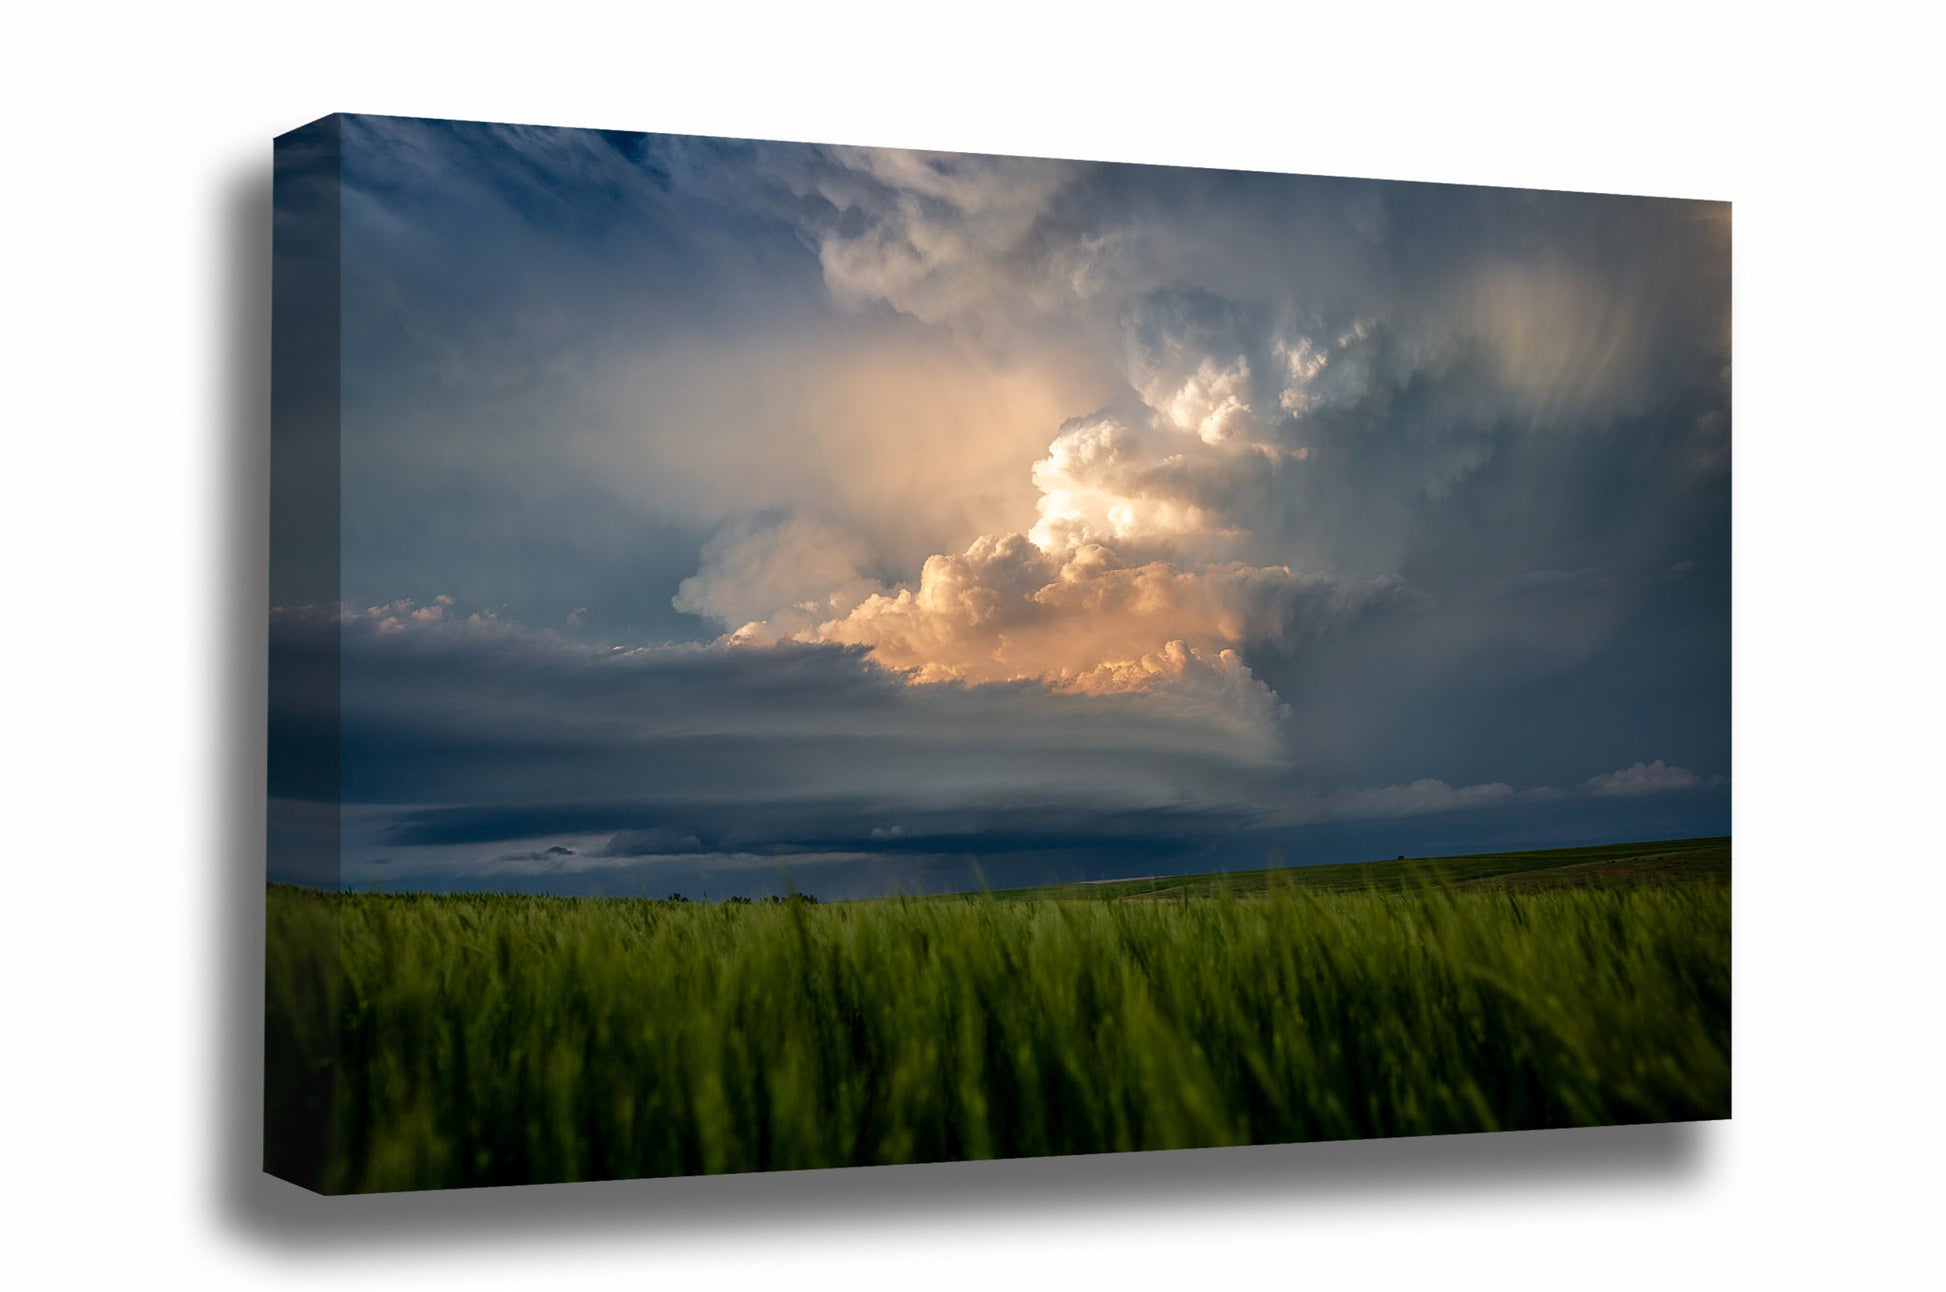 Thunderstorm canvas wall art of a storm illuminated by golden sunlight over a wheat field on a stormy spring day in Kansas by Sean Ramsey of Southern Plains Photography.